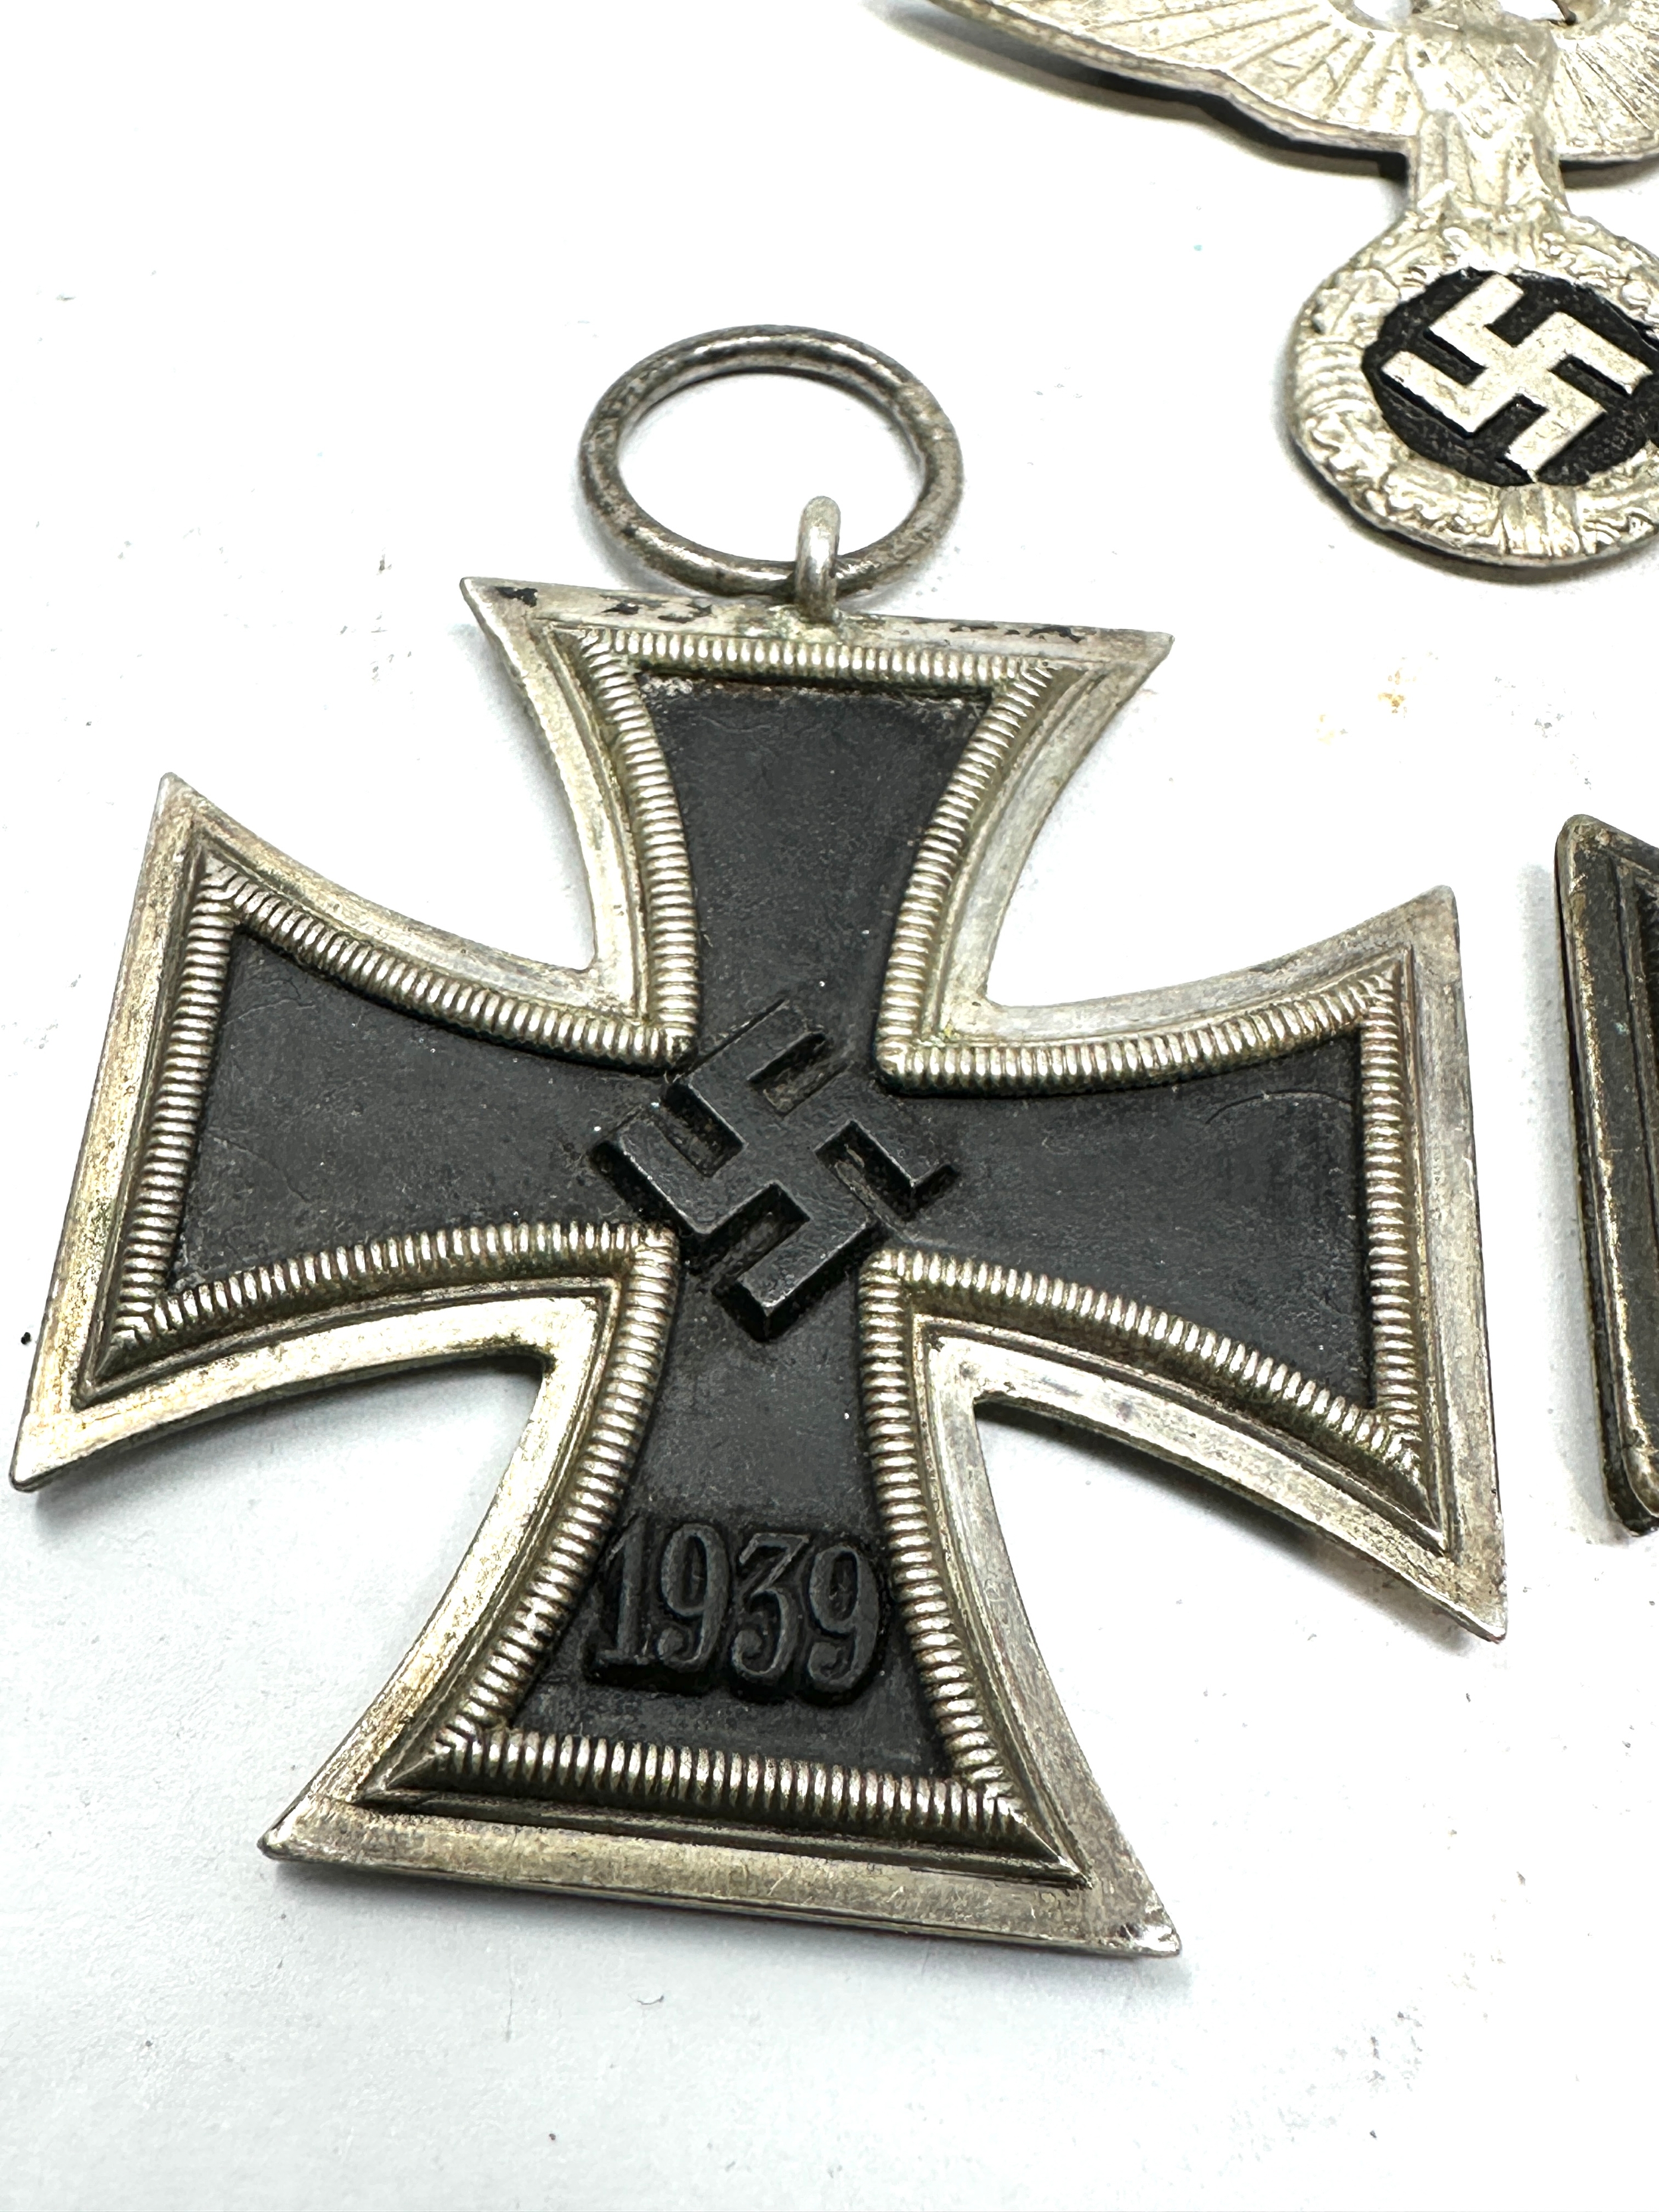 2 ww2 german iron crosses and cap eagle - Image 2 of 5